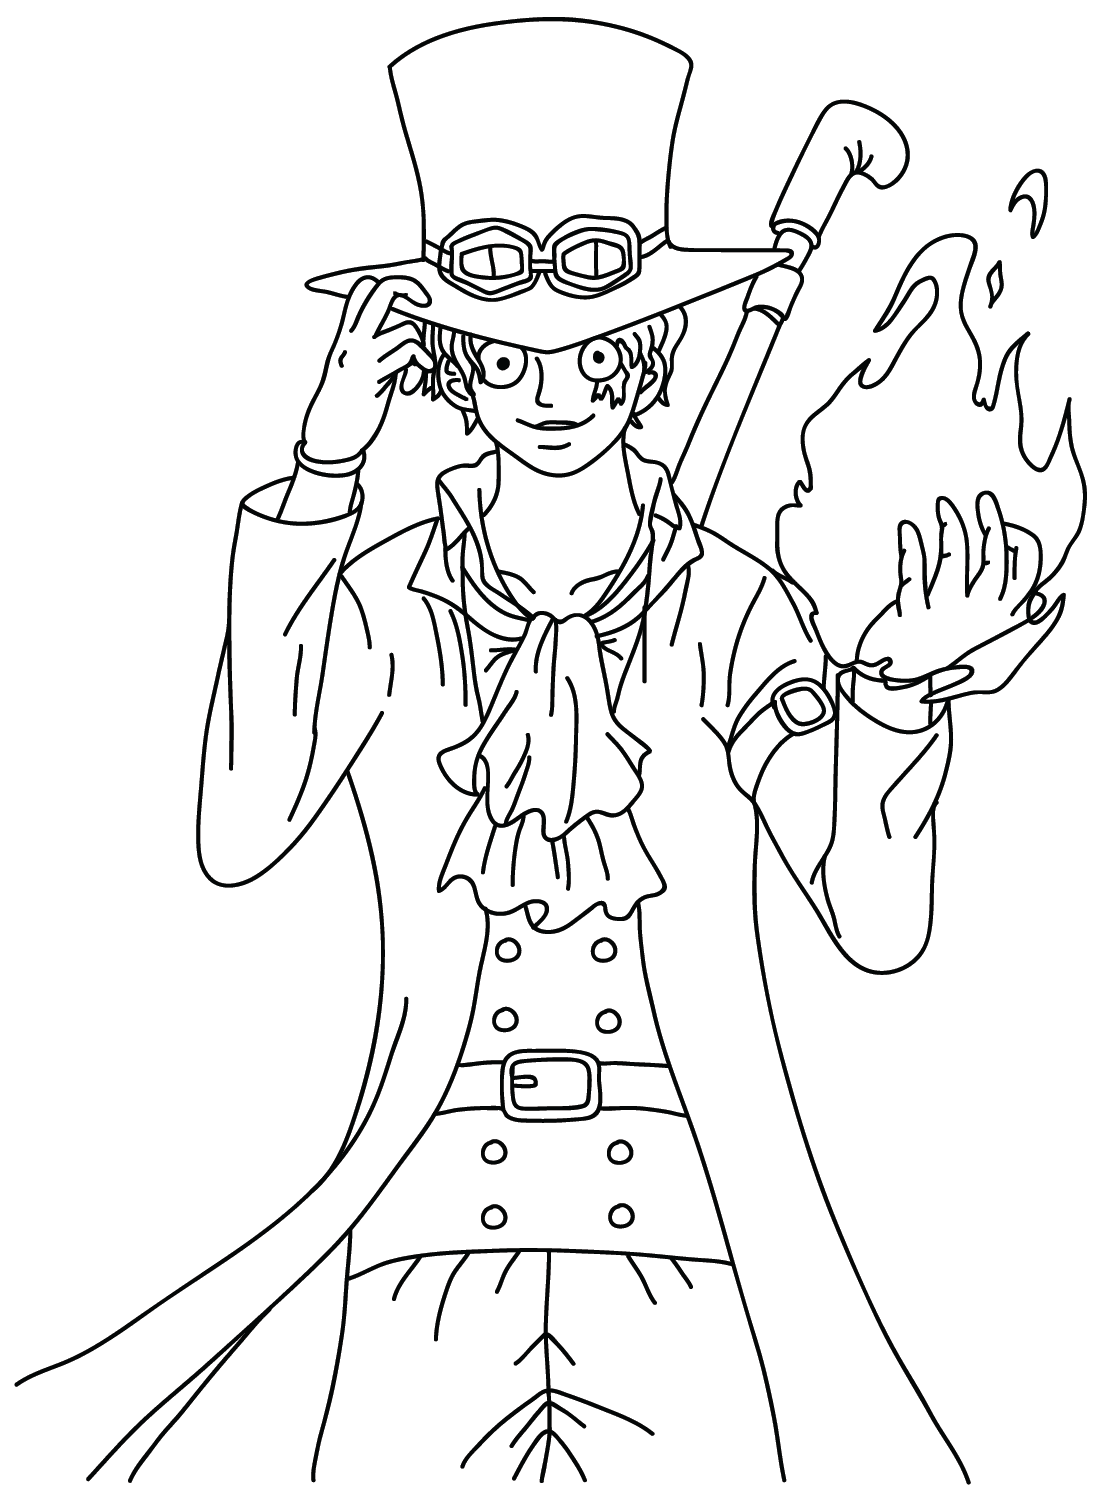 Sabo Coloring Page PDF from Sabo